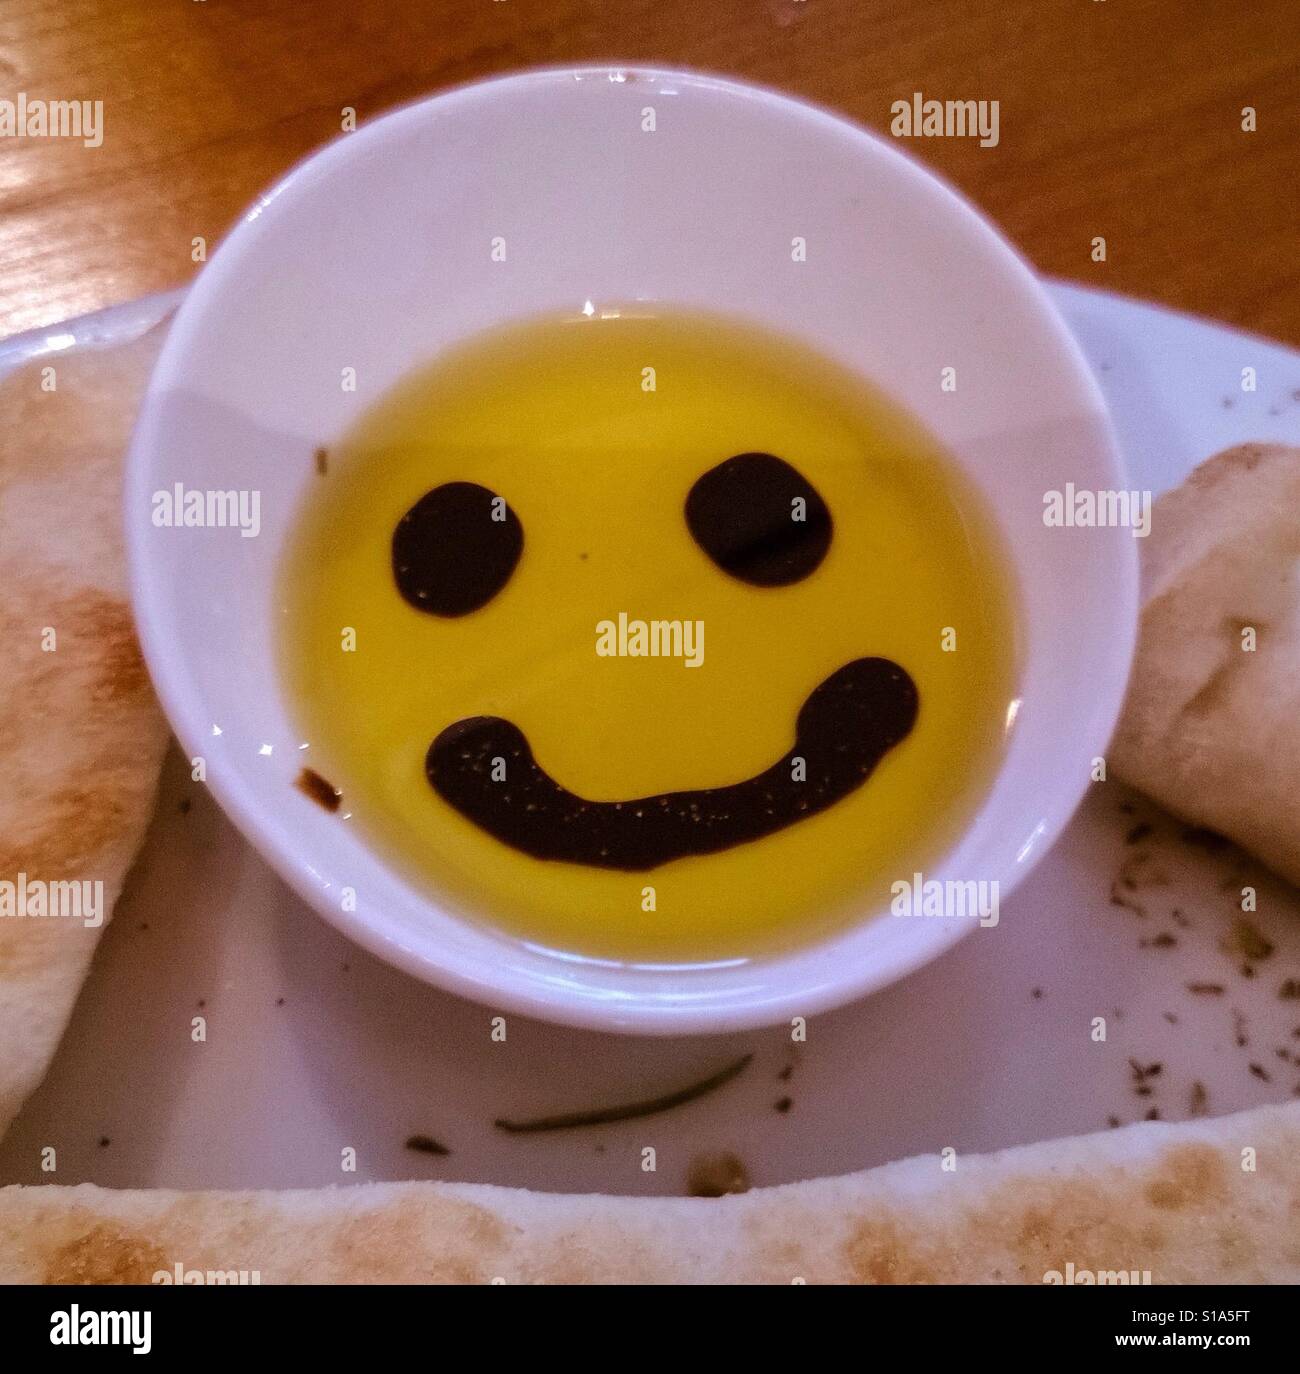 Smiley face emoji oil and balsamic vinegar on plate. Stock Photo